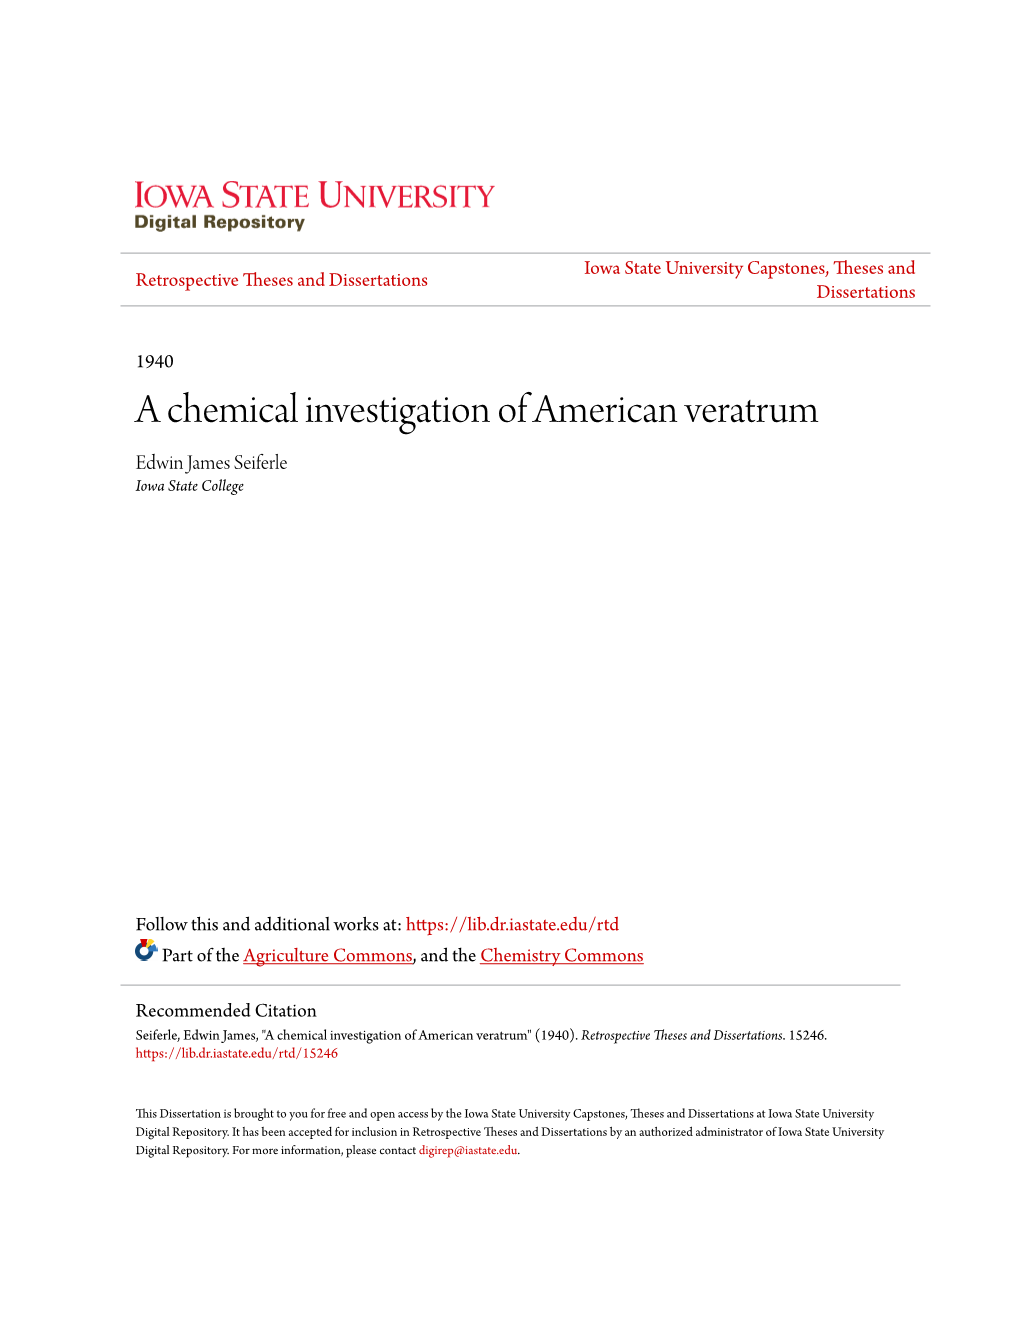 A Chemical Investigation of American Veratrum Edwin James Seiferle Iowa State College